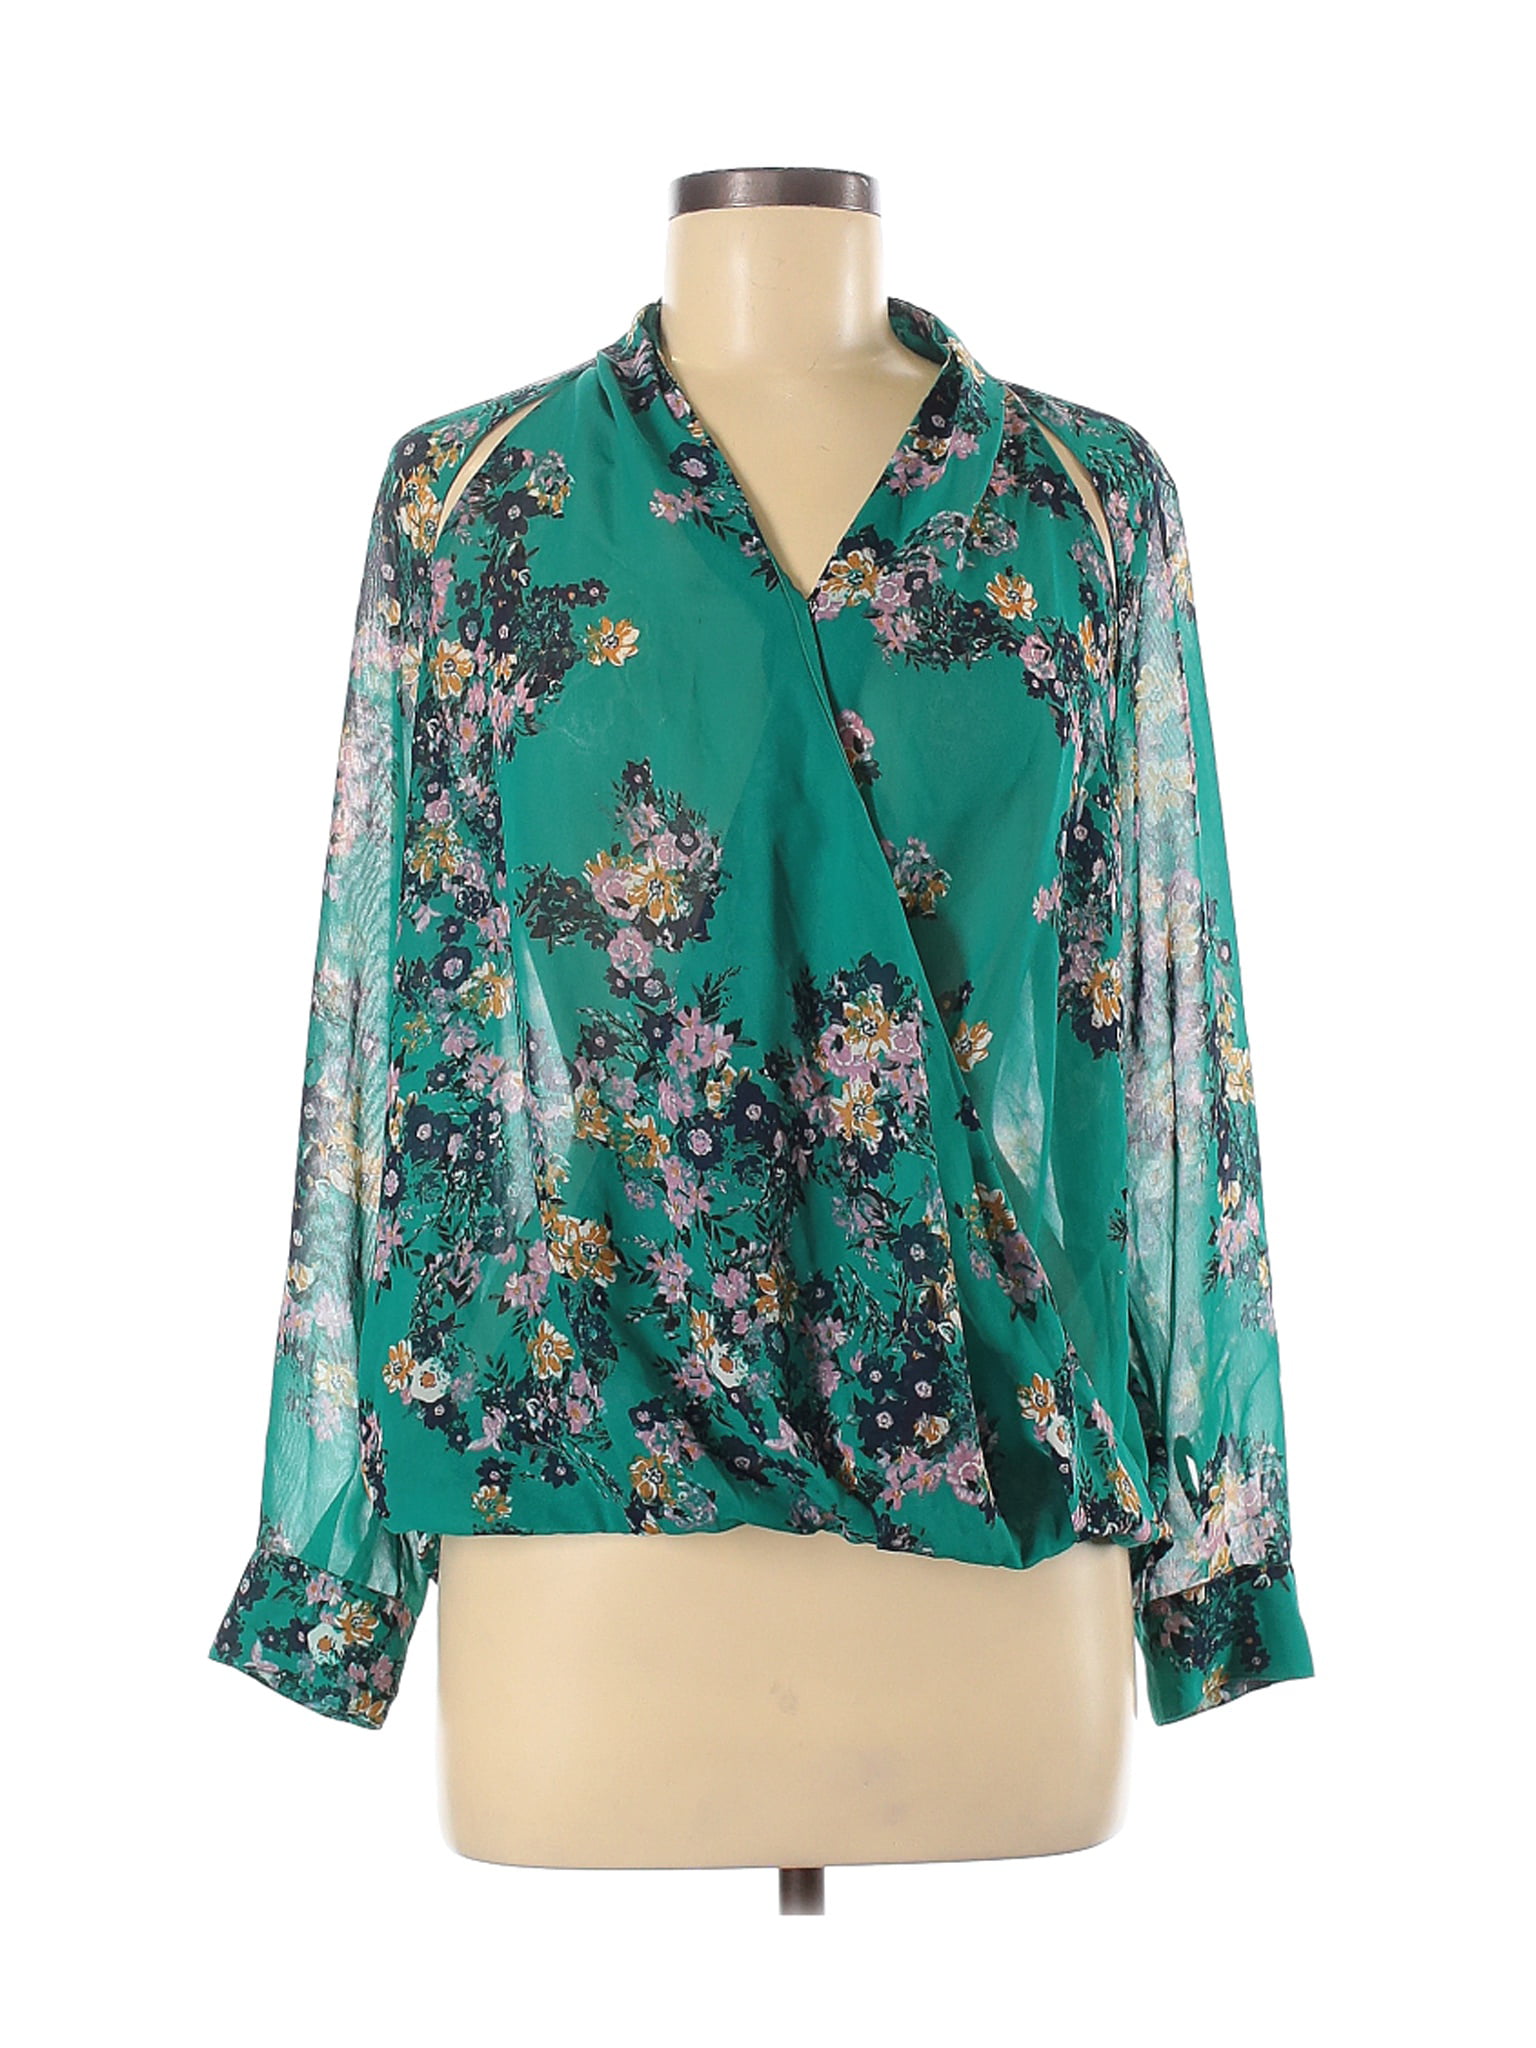 maurices - Pre-Owned Maurices Women's Size M Long Sleeve Blouse ...